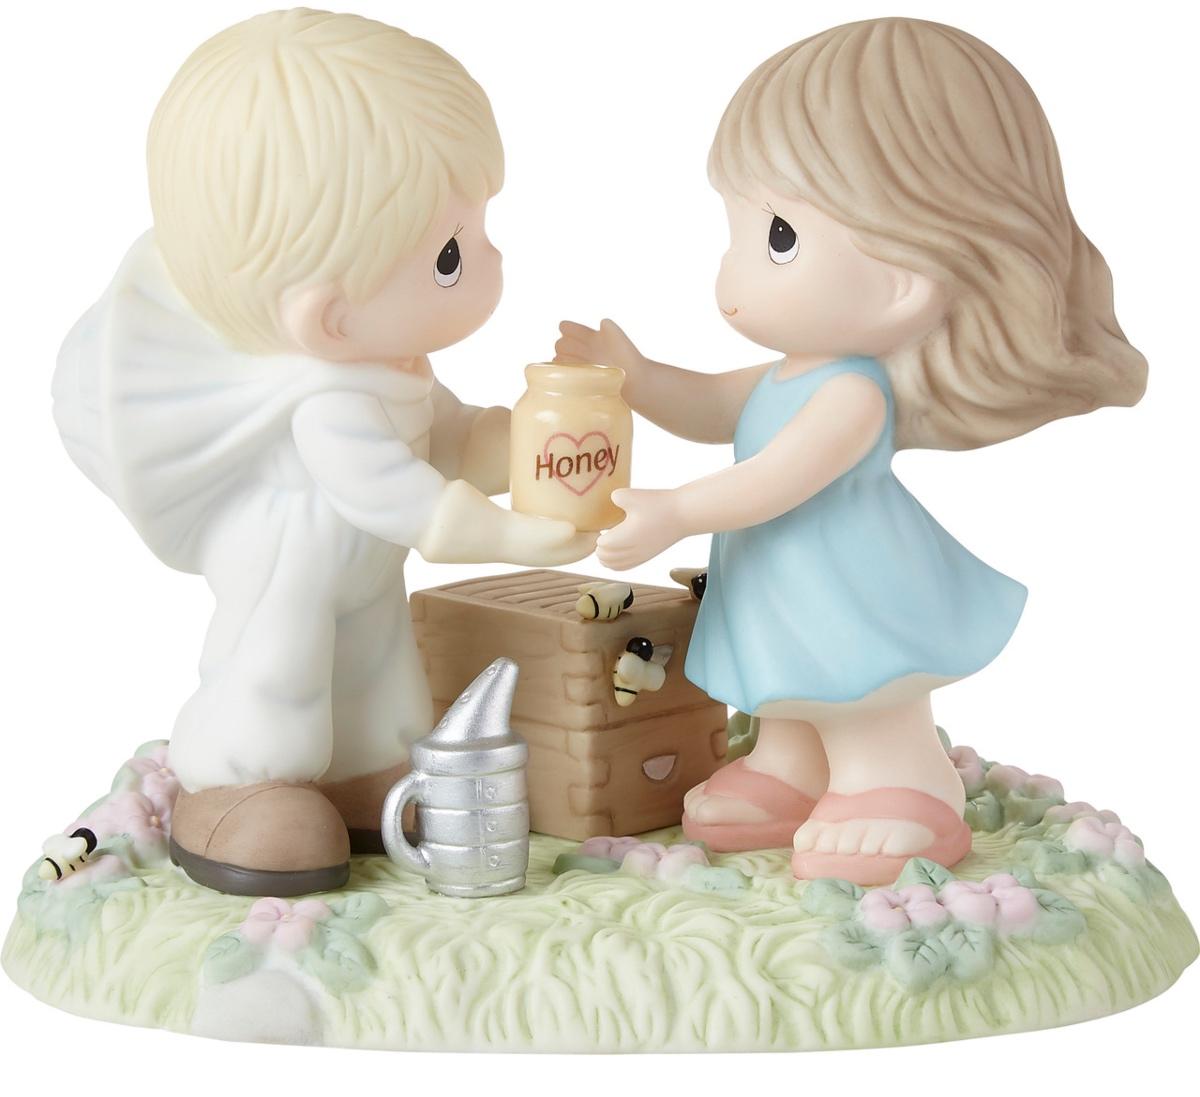 Are Precious Moments figurines worth anything?